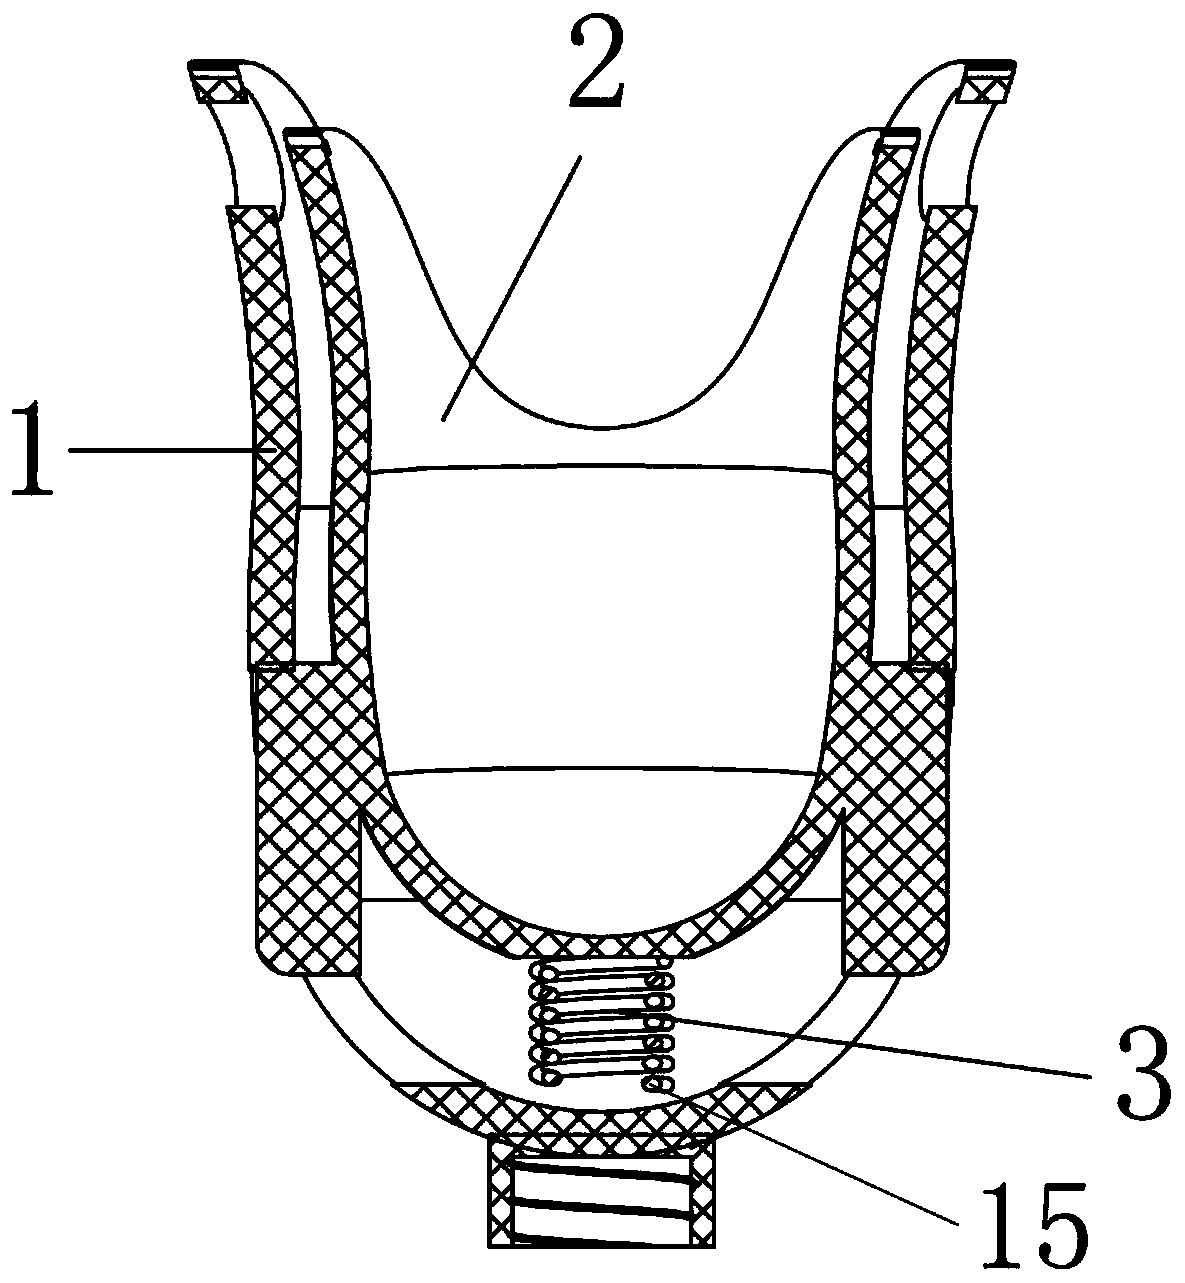 Self-adaptive connecting piece based on connection of human artificial limb and residual limb